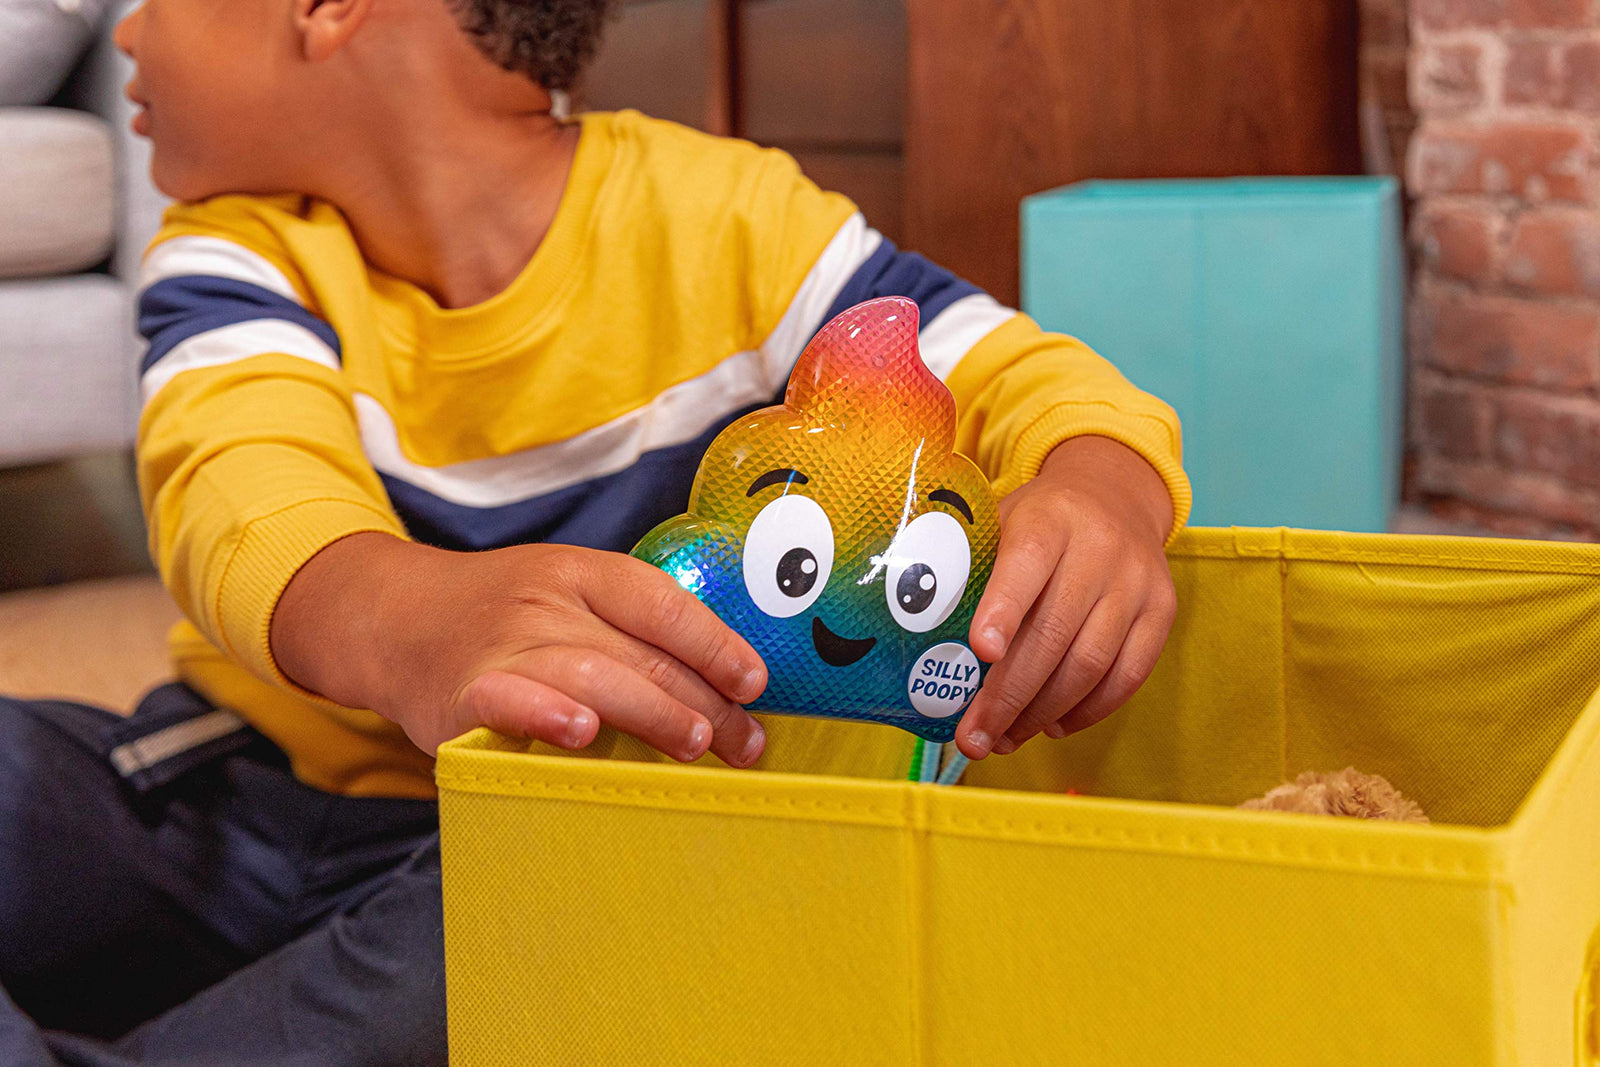 WHAT DO YOU MEME? Silly Poopy's Hide & Seek - The Talking, Singing Rainbow Poop Toy to Encourage Active Play Kids